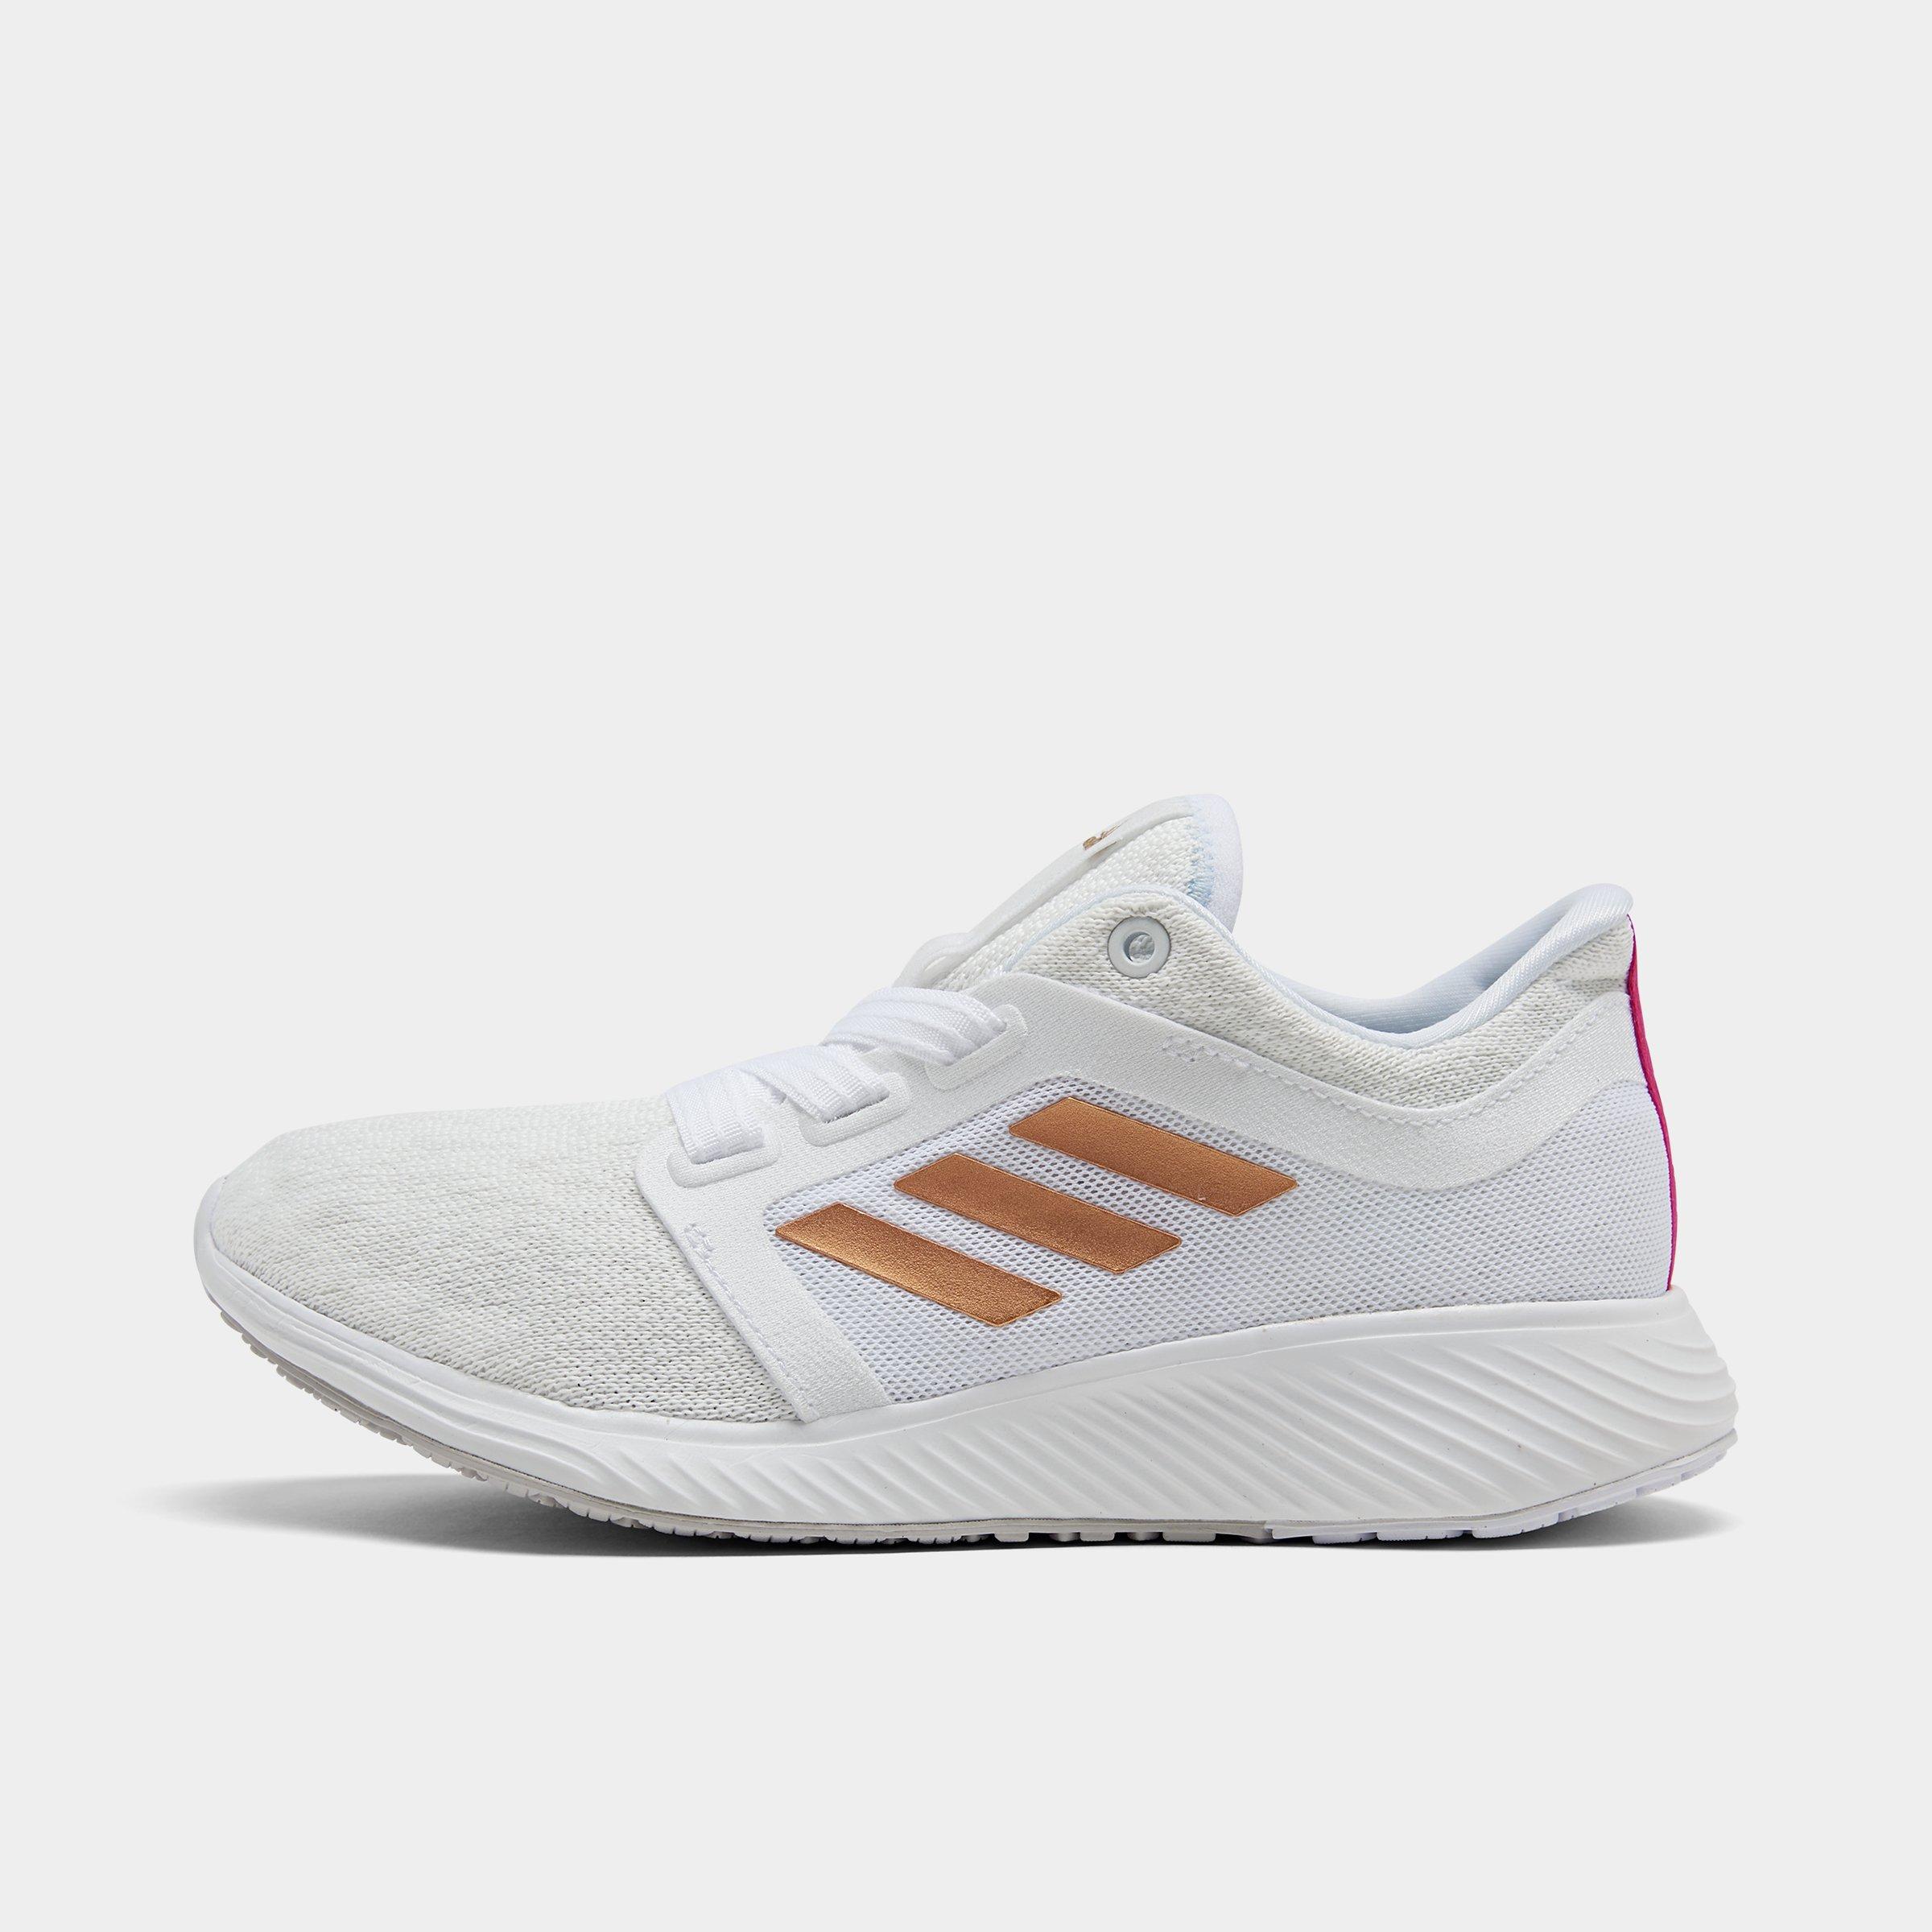 adidas edge lux for running